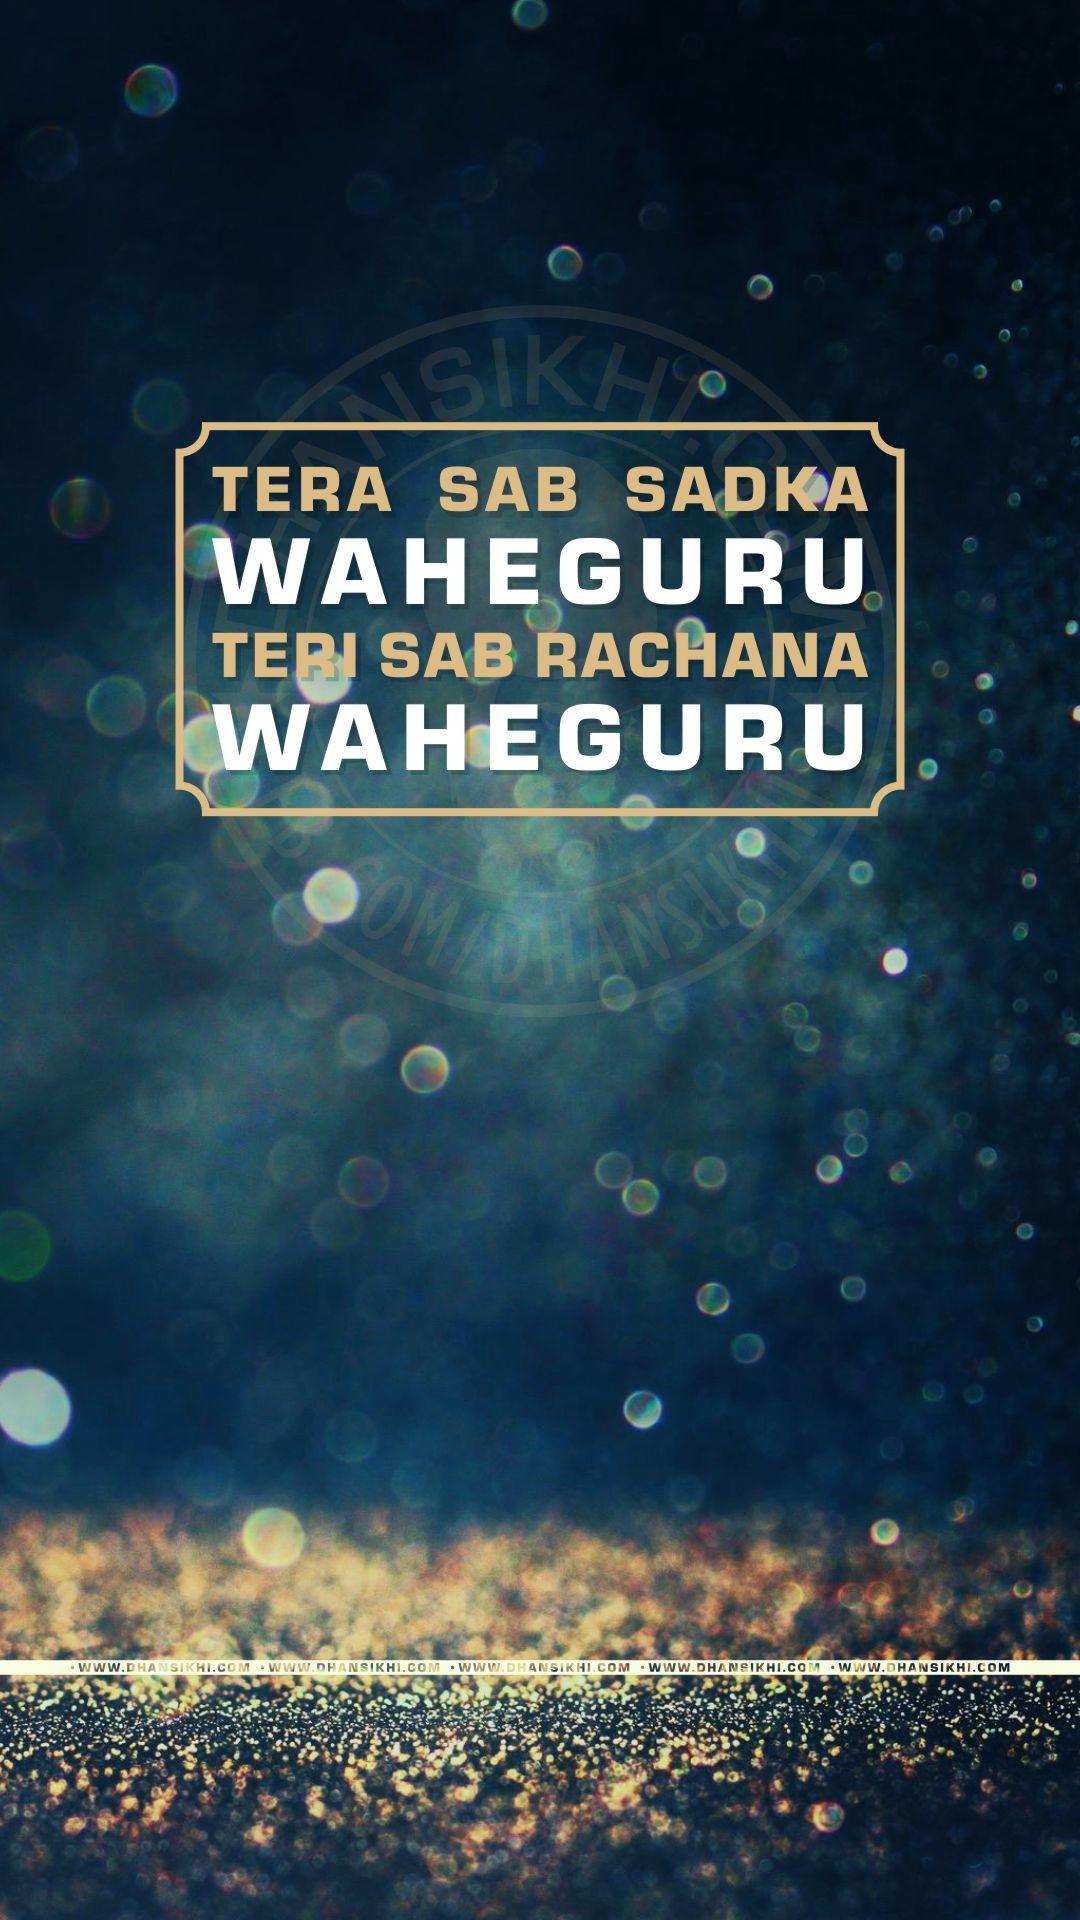 Download Waheguru In Blue And Yellow Clothing Wallpaper | Wallpapers.com-cheohanoi.vn